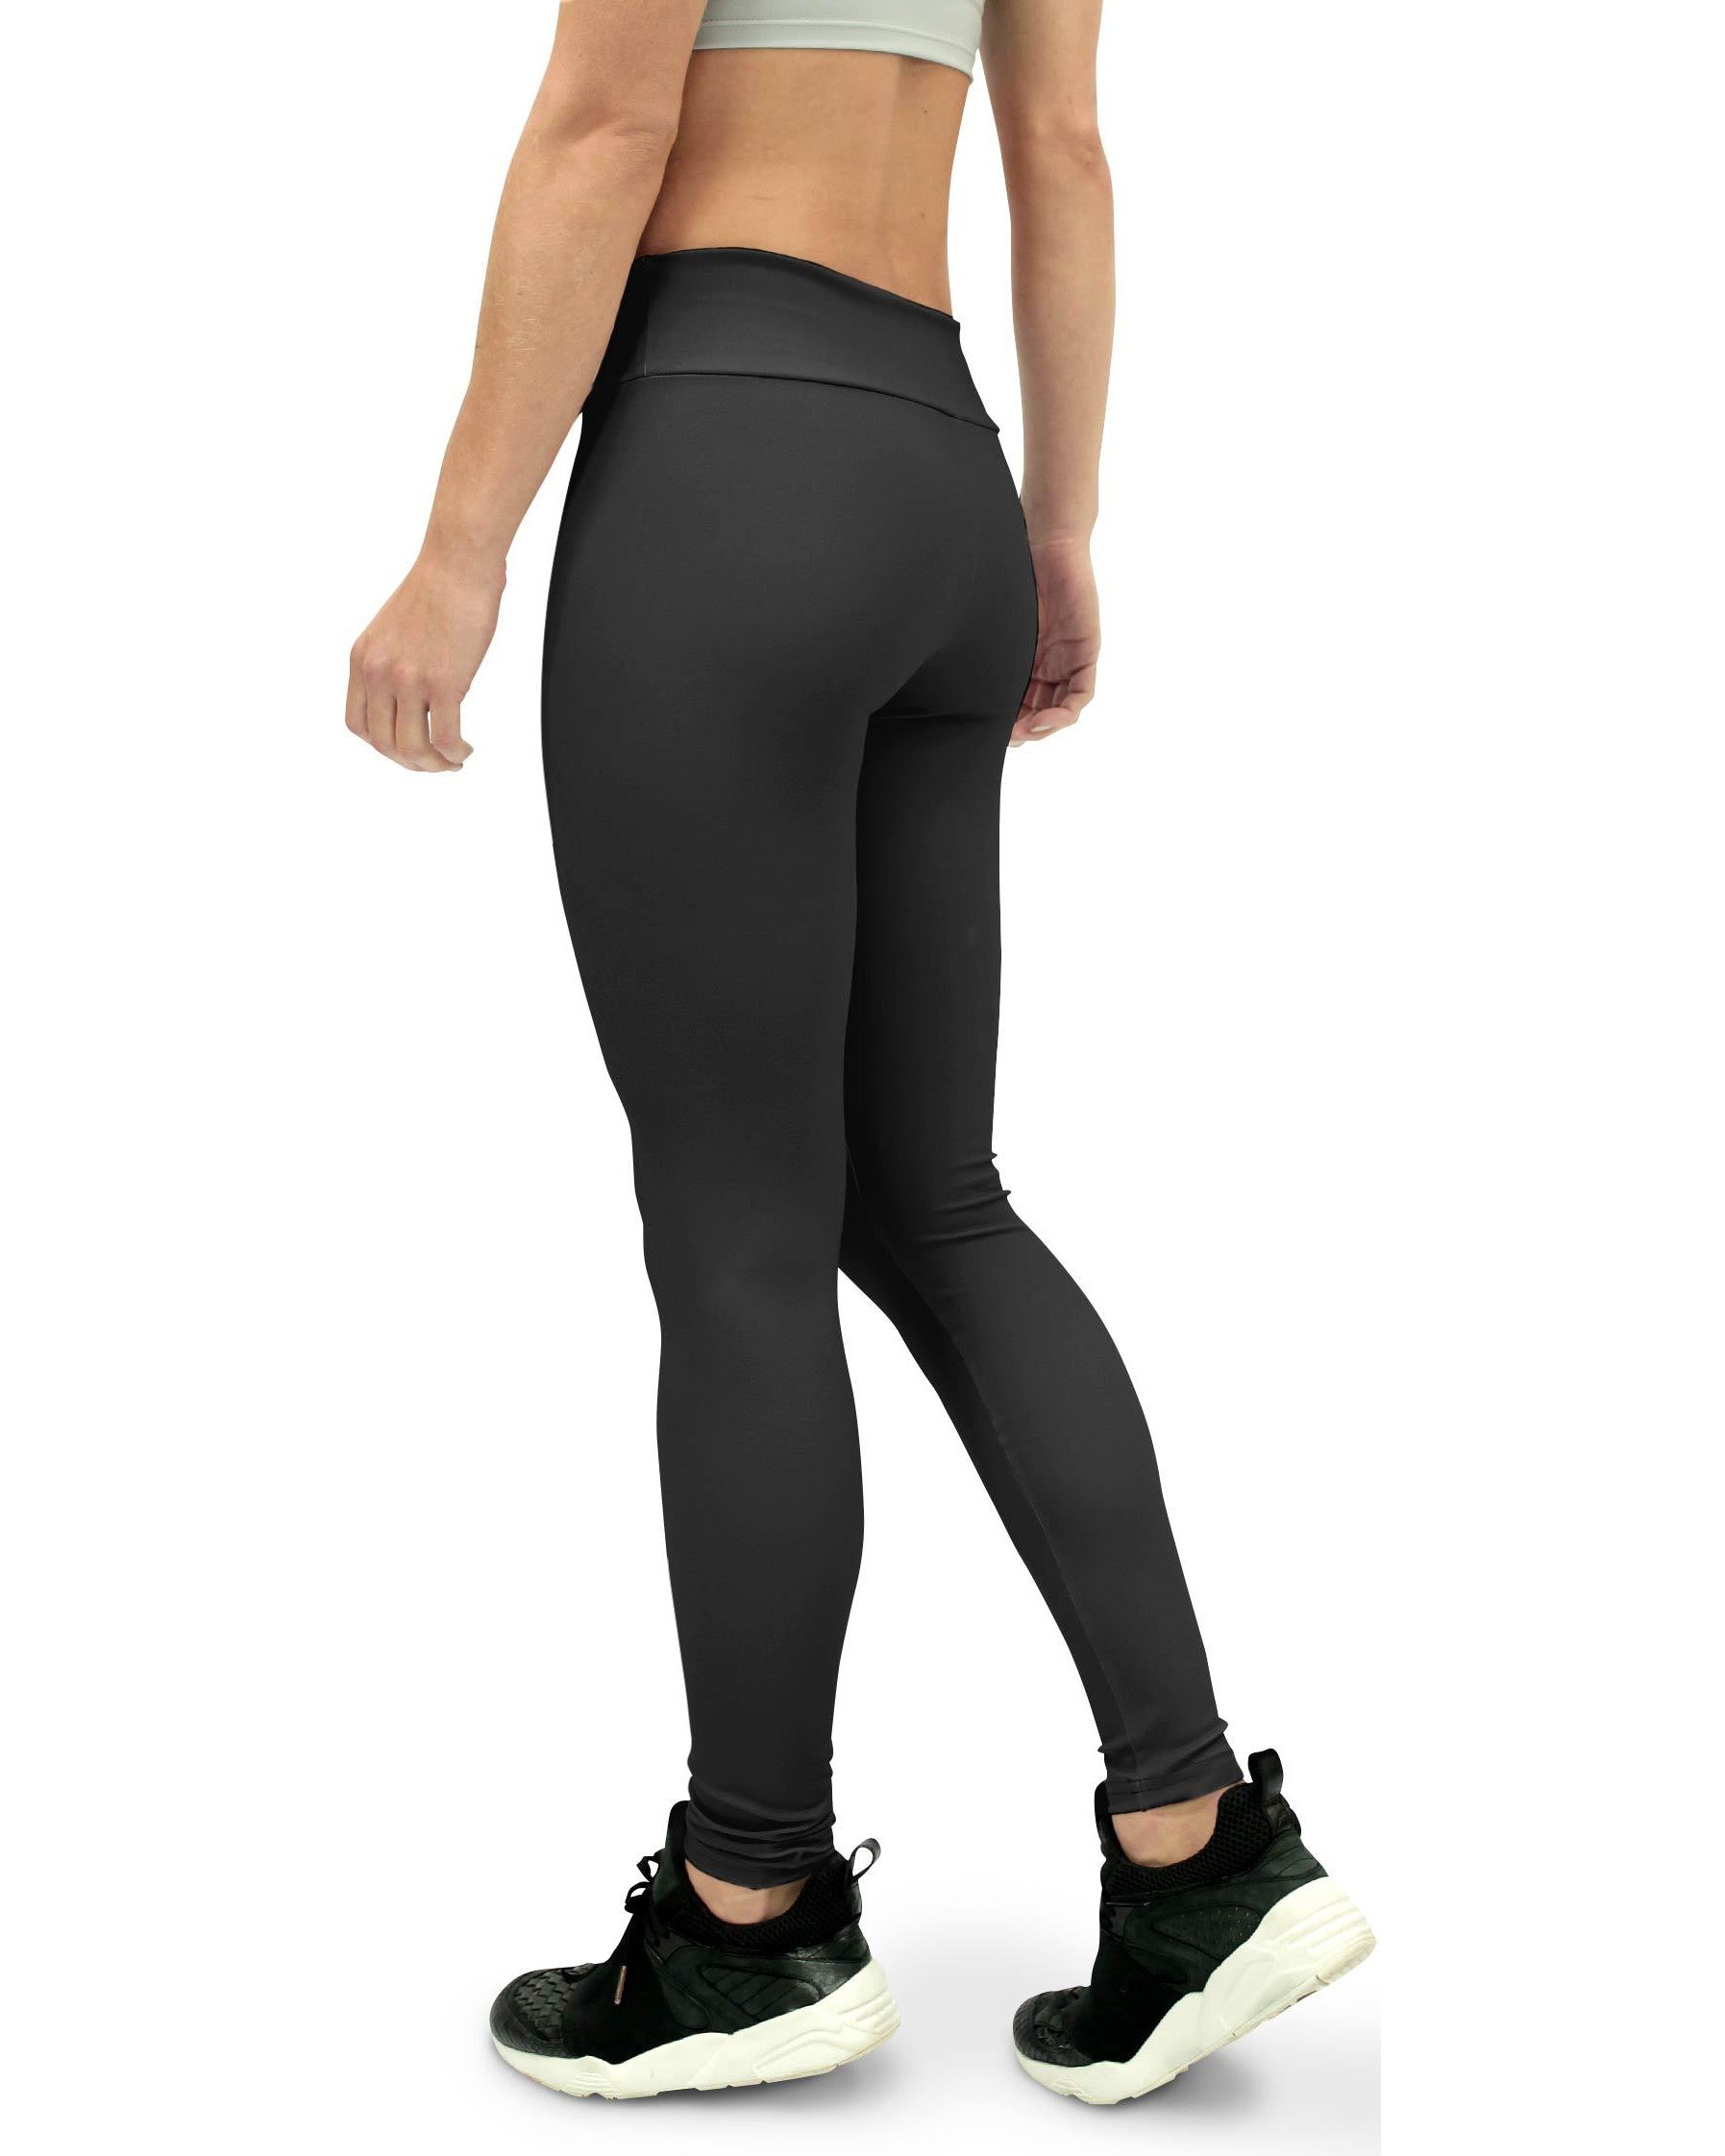 Sexy Yoga Pants for Women in Black or Grey - Affordable Comfort! – Mechaly